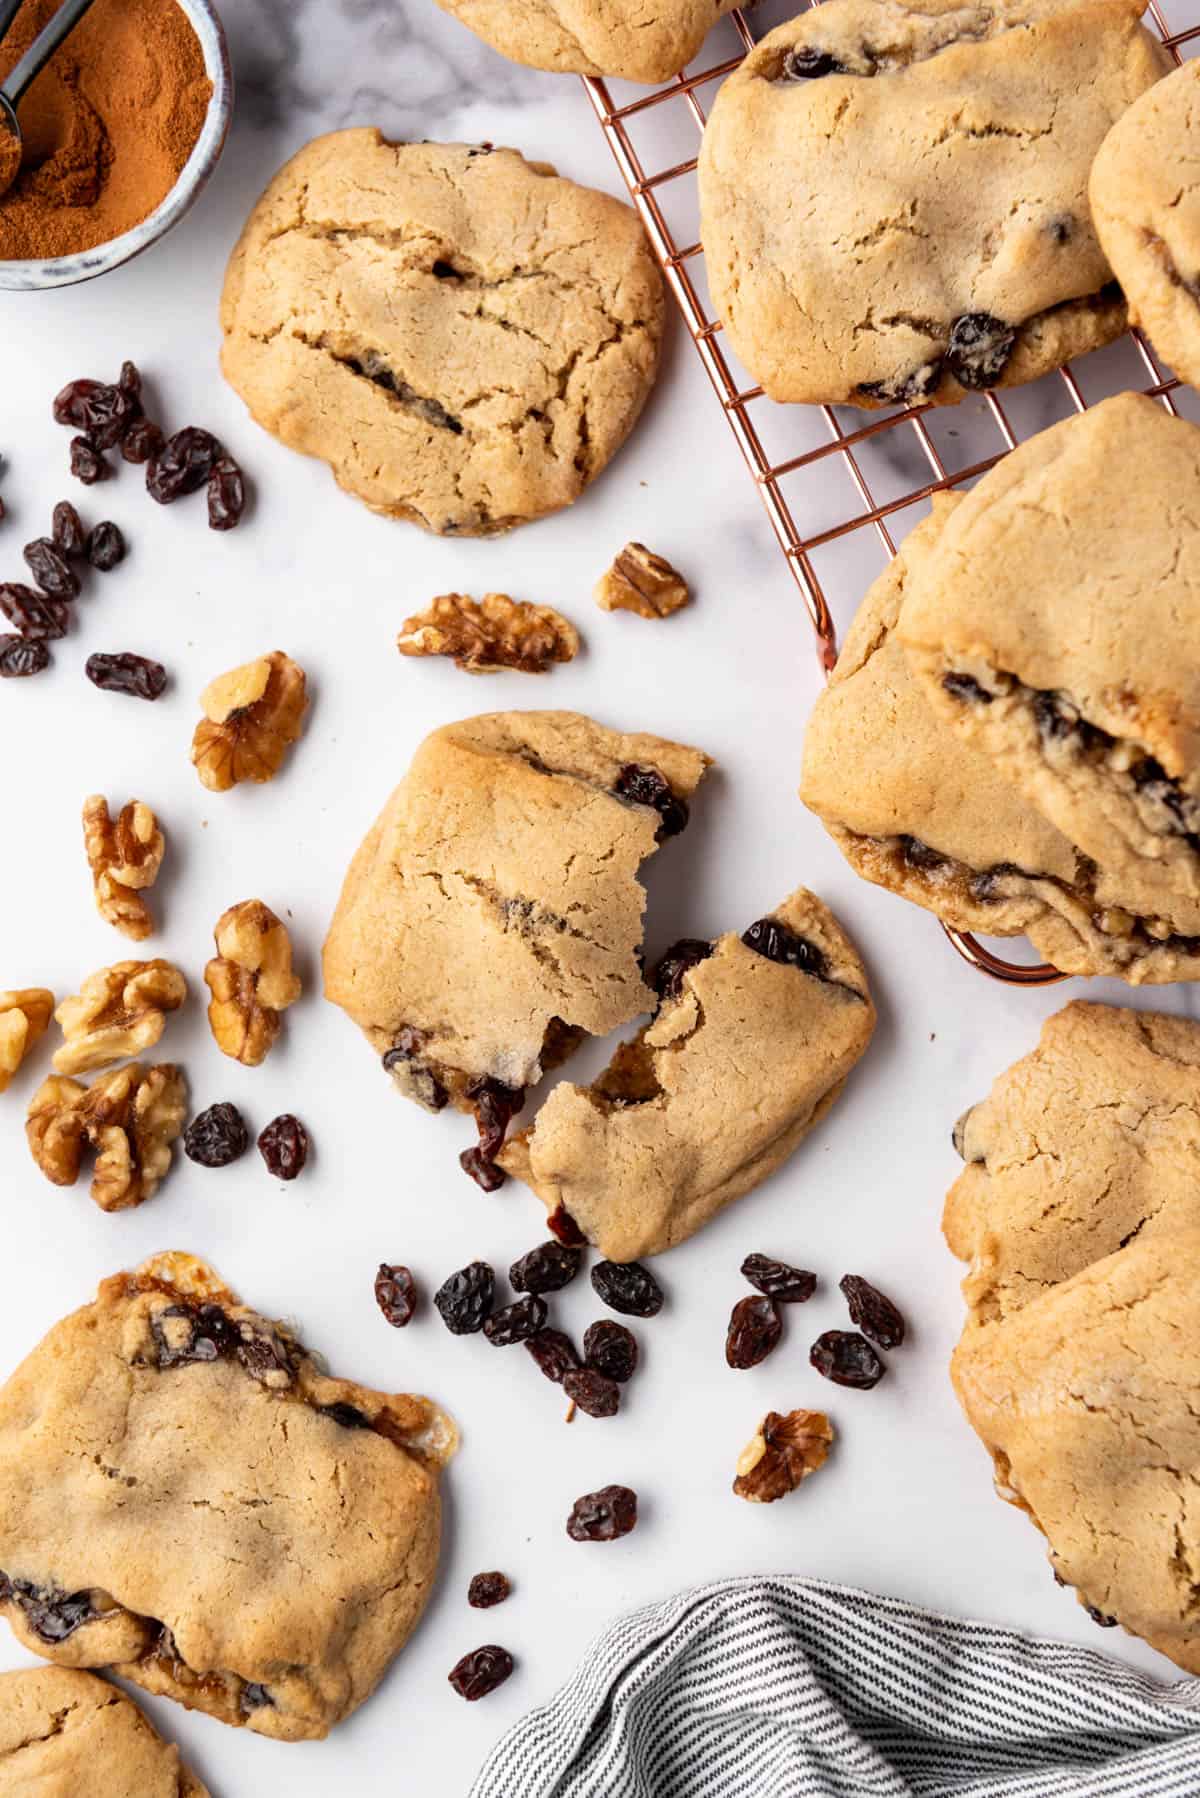 An overhead image of raisin-filled cookies with one of them broken in half with raisins and walnuts scattered around.